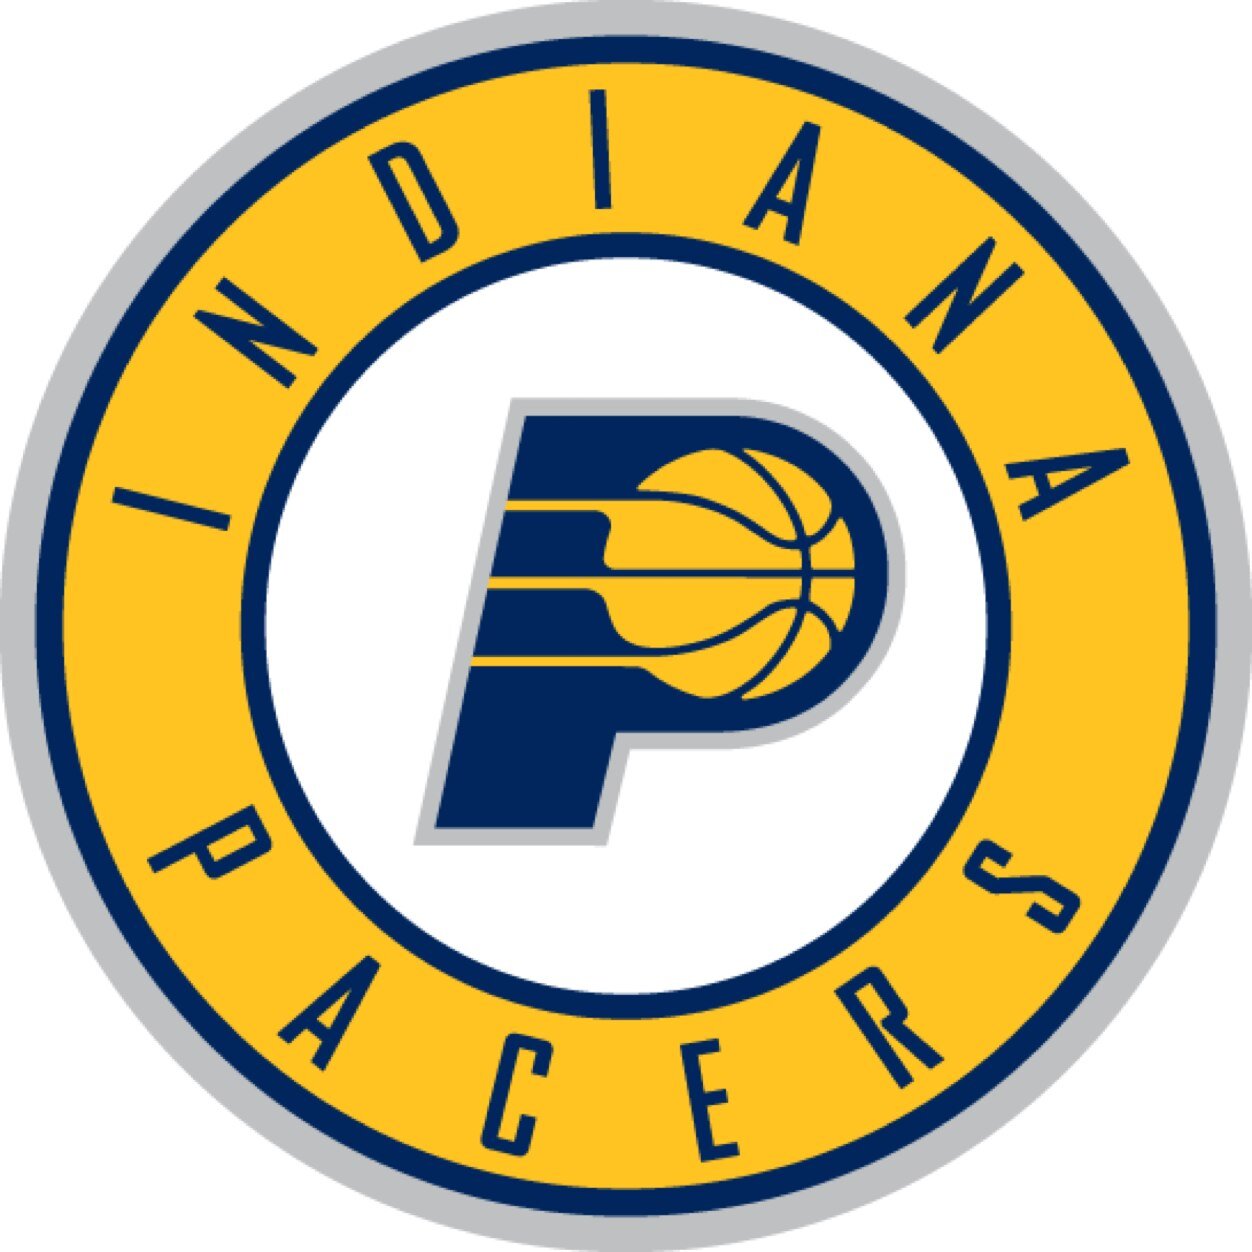 Indiana Pacers fan page! #PacerNation #BlueCollar #GoldSwagger PG24, Hibbert, D West, Hometown Hero! #KingGeorge